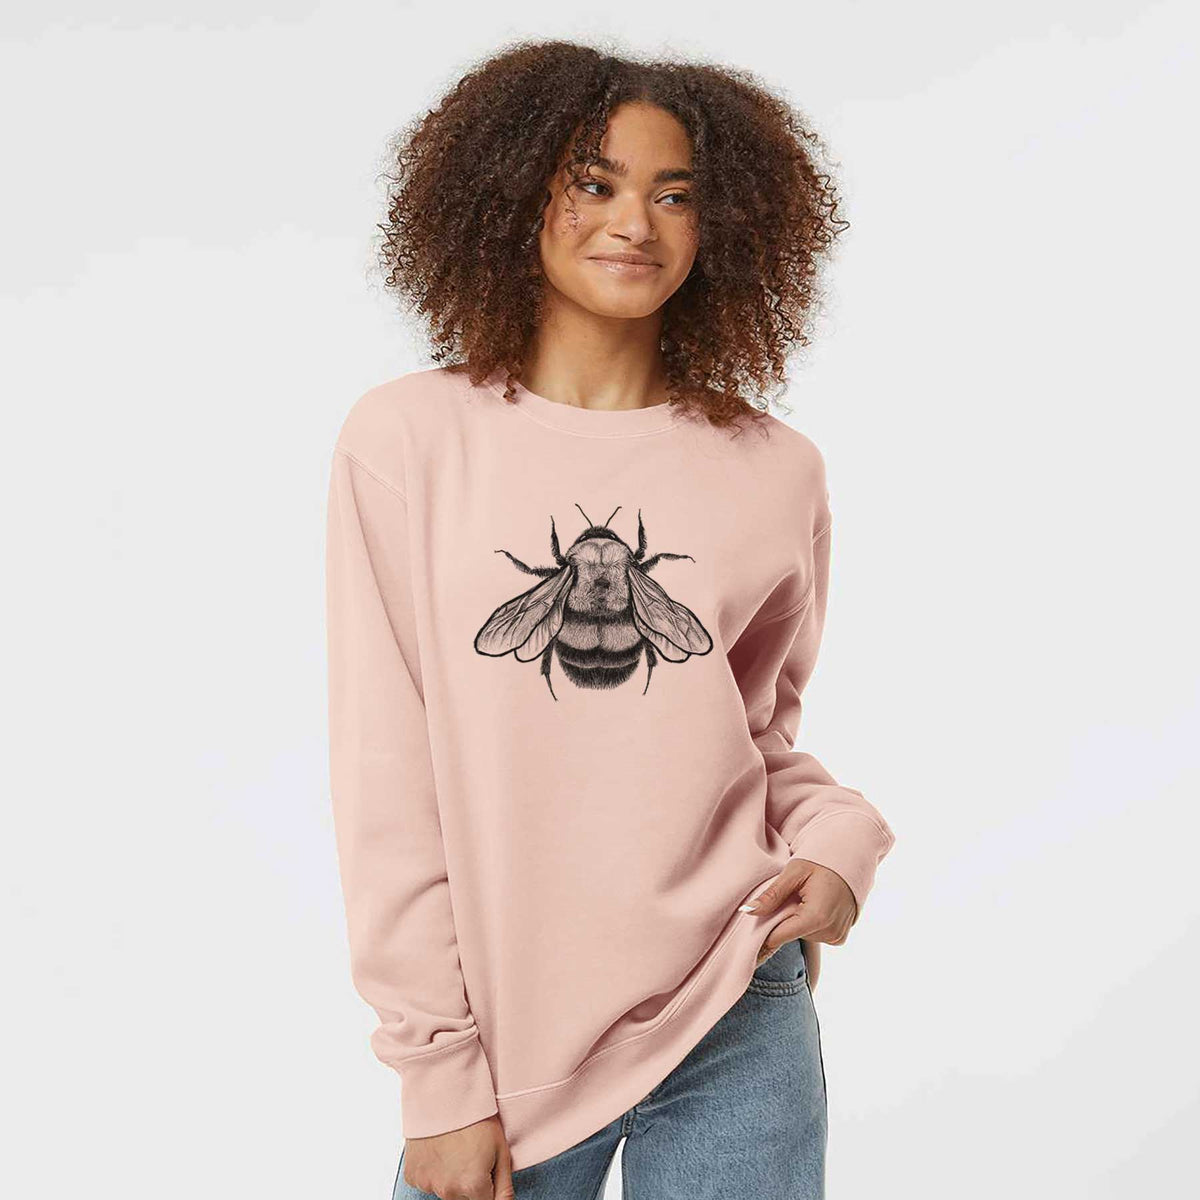 Bombus Affinis - Rusty-Patched Bumble Bee - Unisex Pigment Dyed Crew Sweatshirt